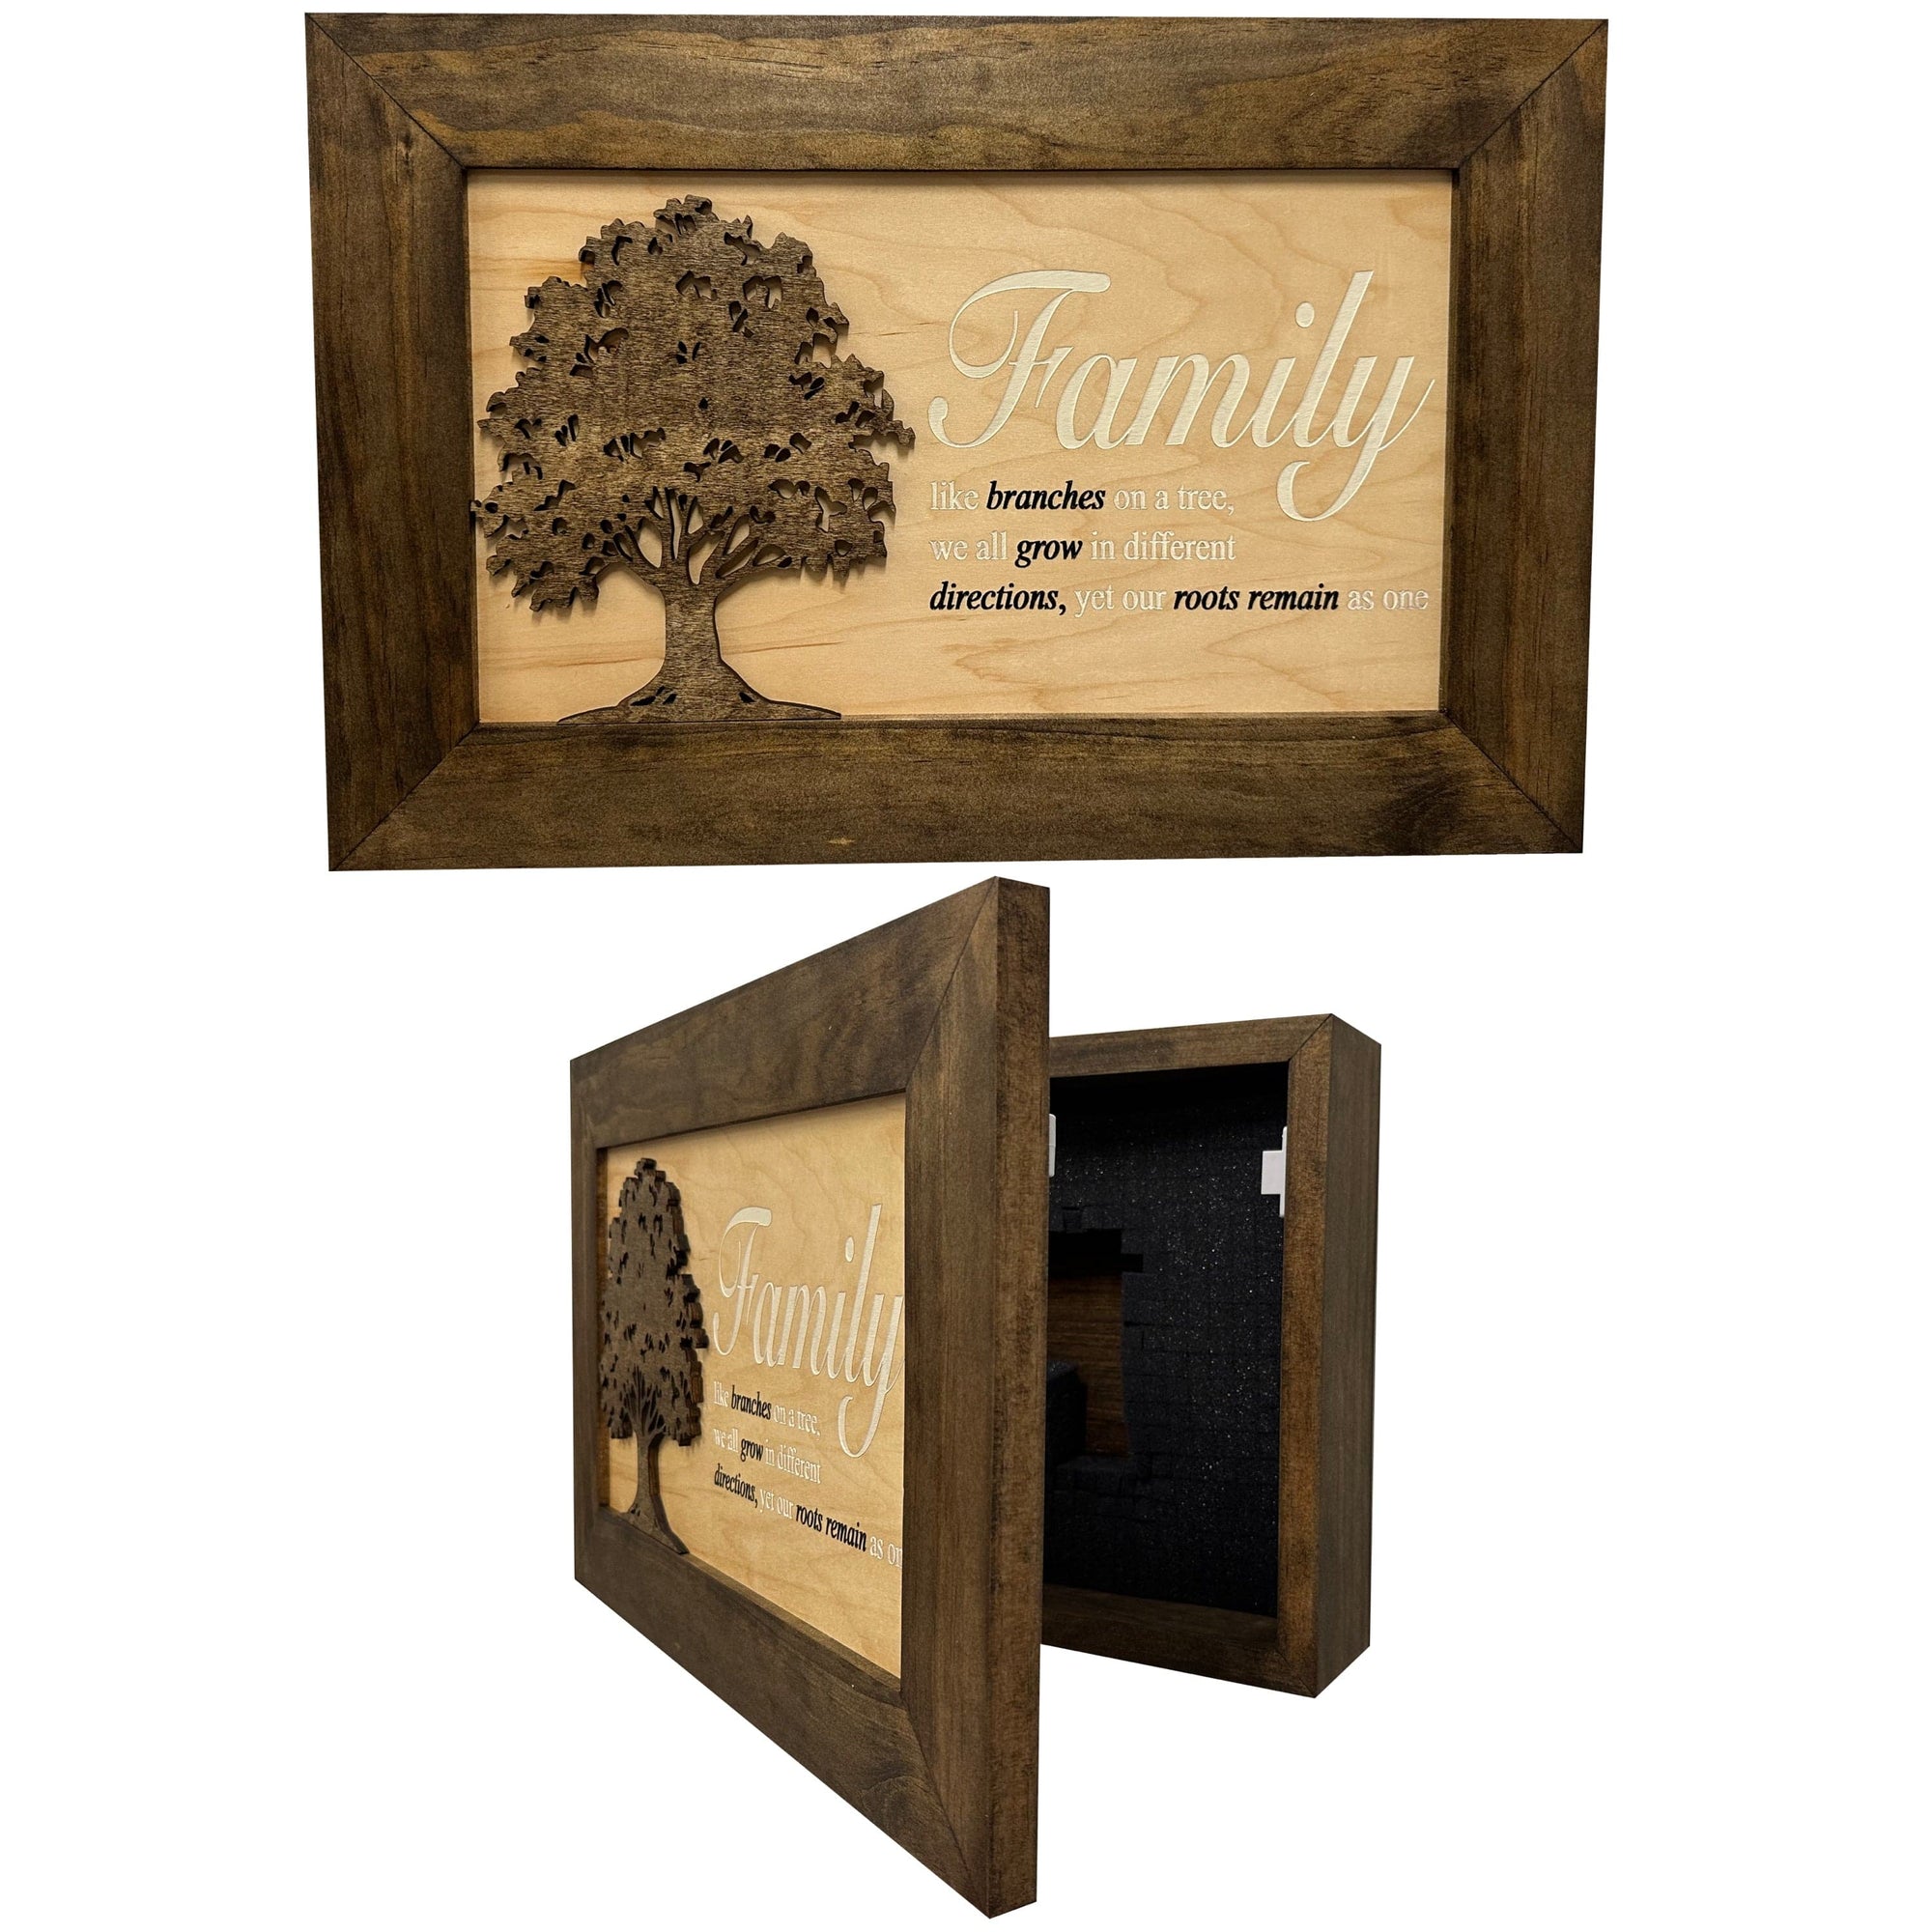 Decorative Secured Gun Storage Cabinet with Family Branches (Dark Walnut) Armadillo Safe and Vault